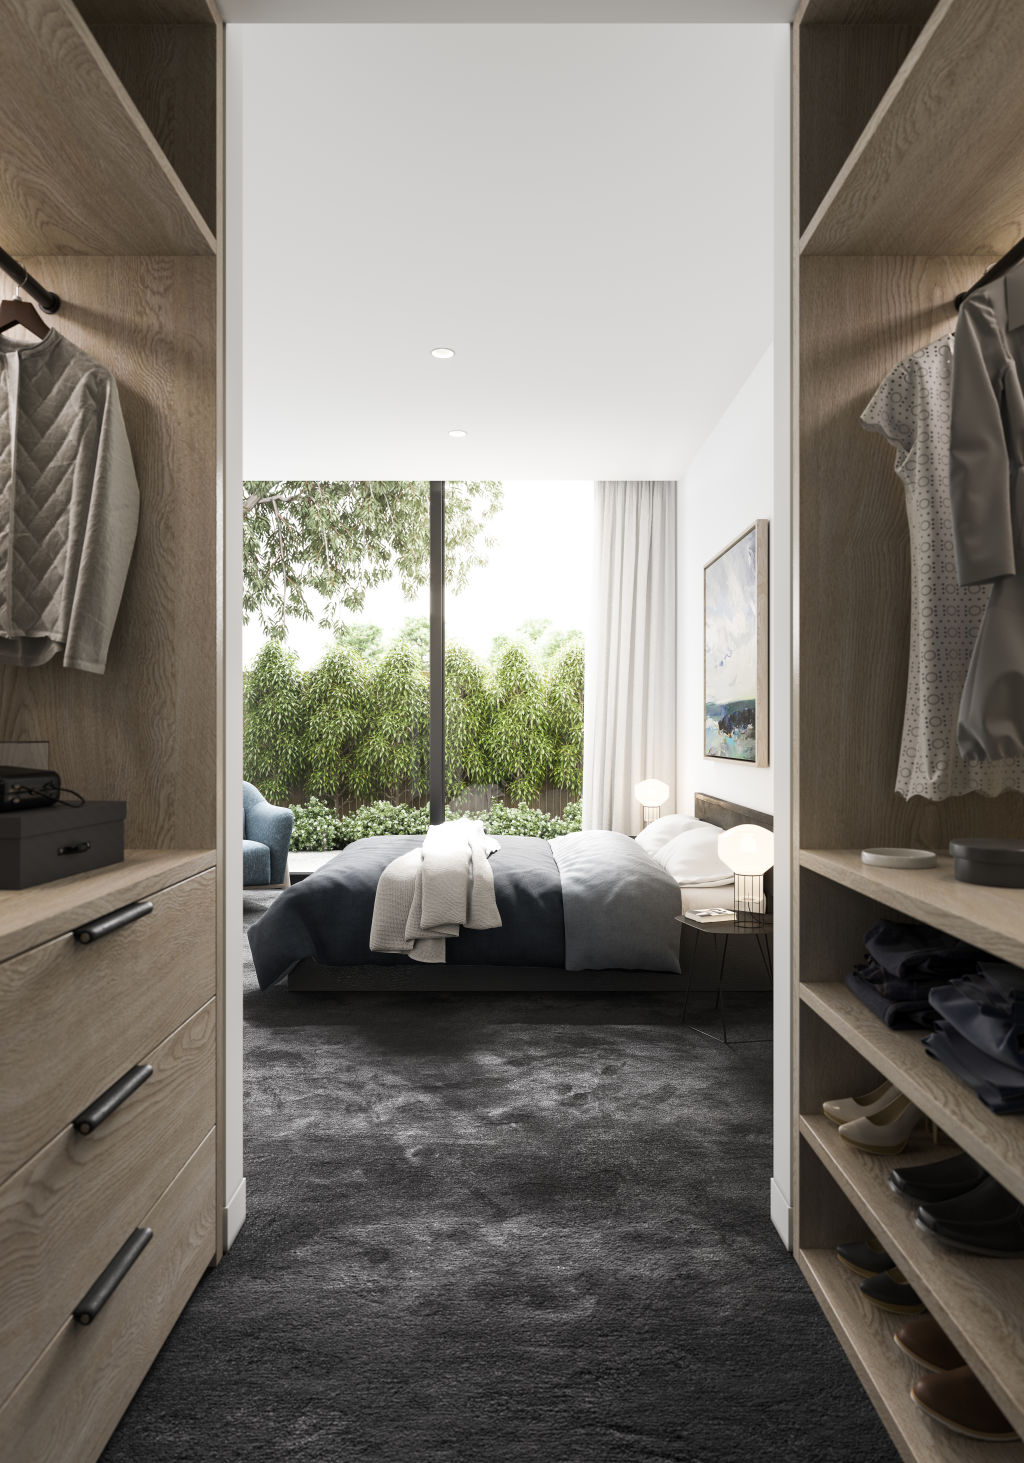 Each apartment is imbued with the same level of luxury. Photo: Artist impression